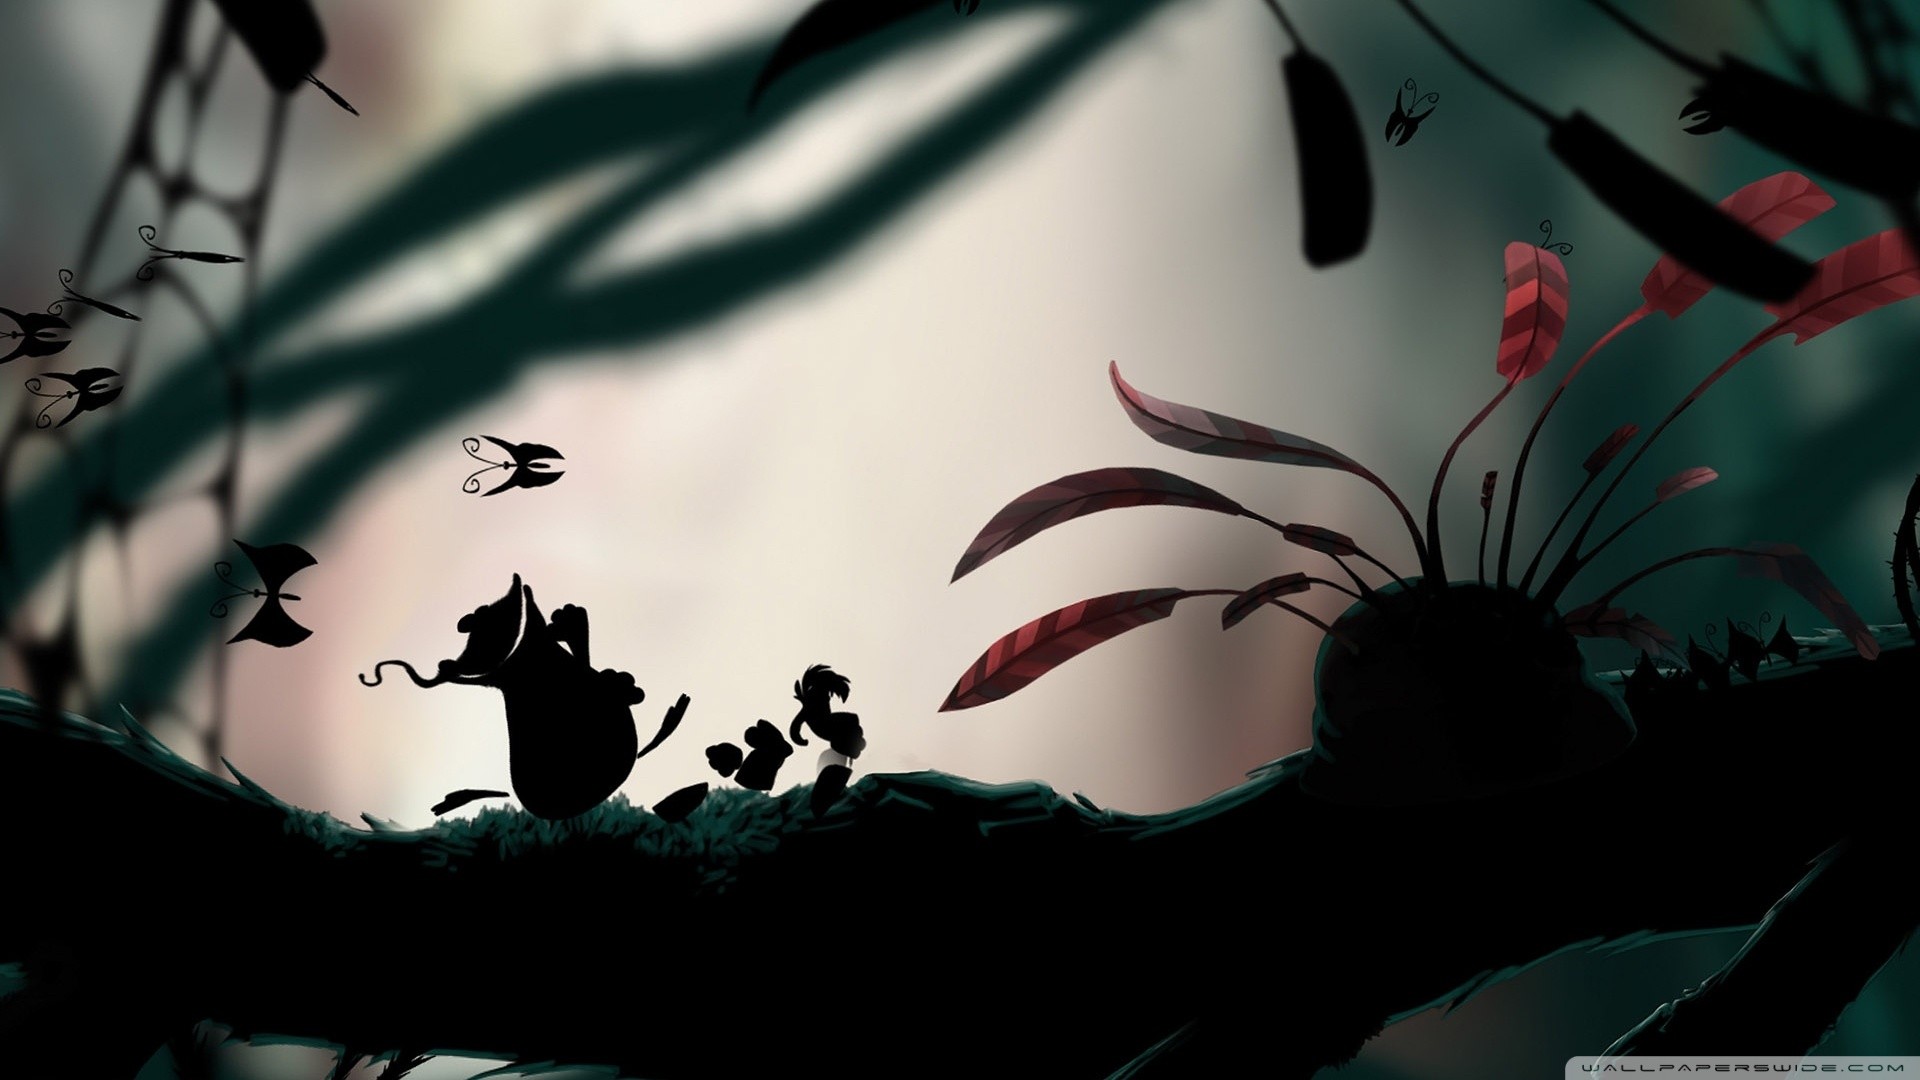 General 1920x1080 video games silhouette Rayman Rayman Legends video game art artwork branch jungle dark video game characters log butterfly